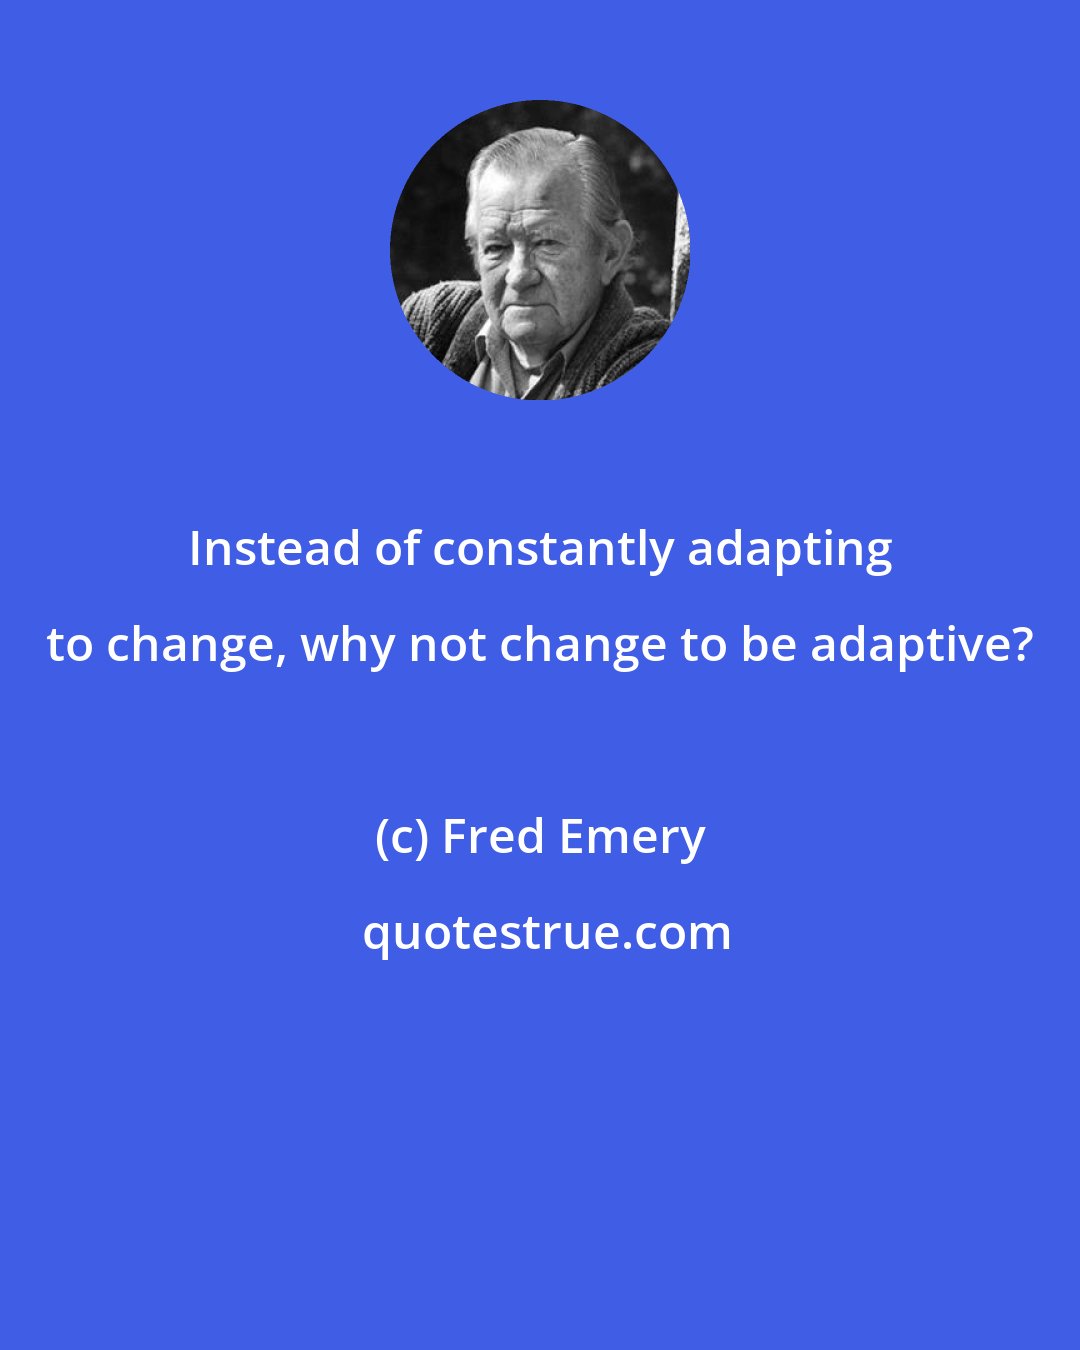 Fred Emery: Instead of constantly adapting to change, why not change to be adaptive?